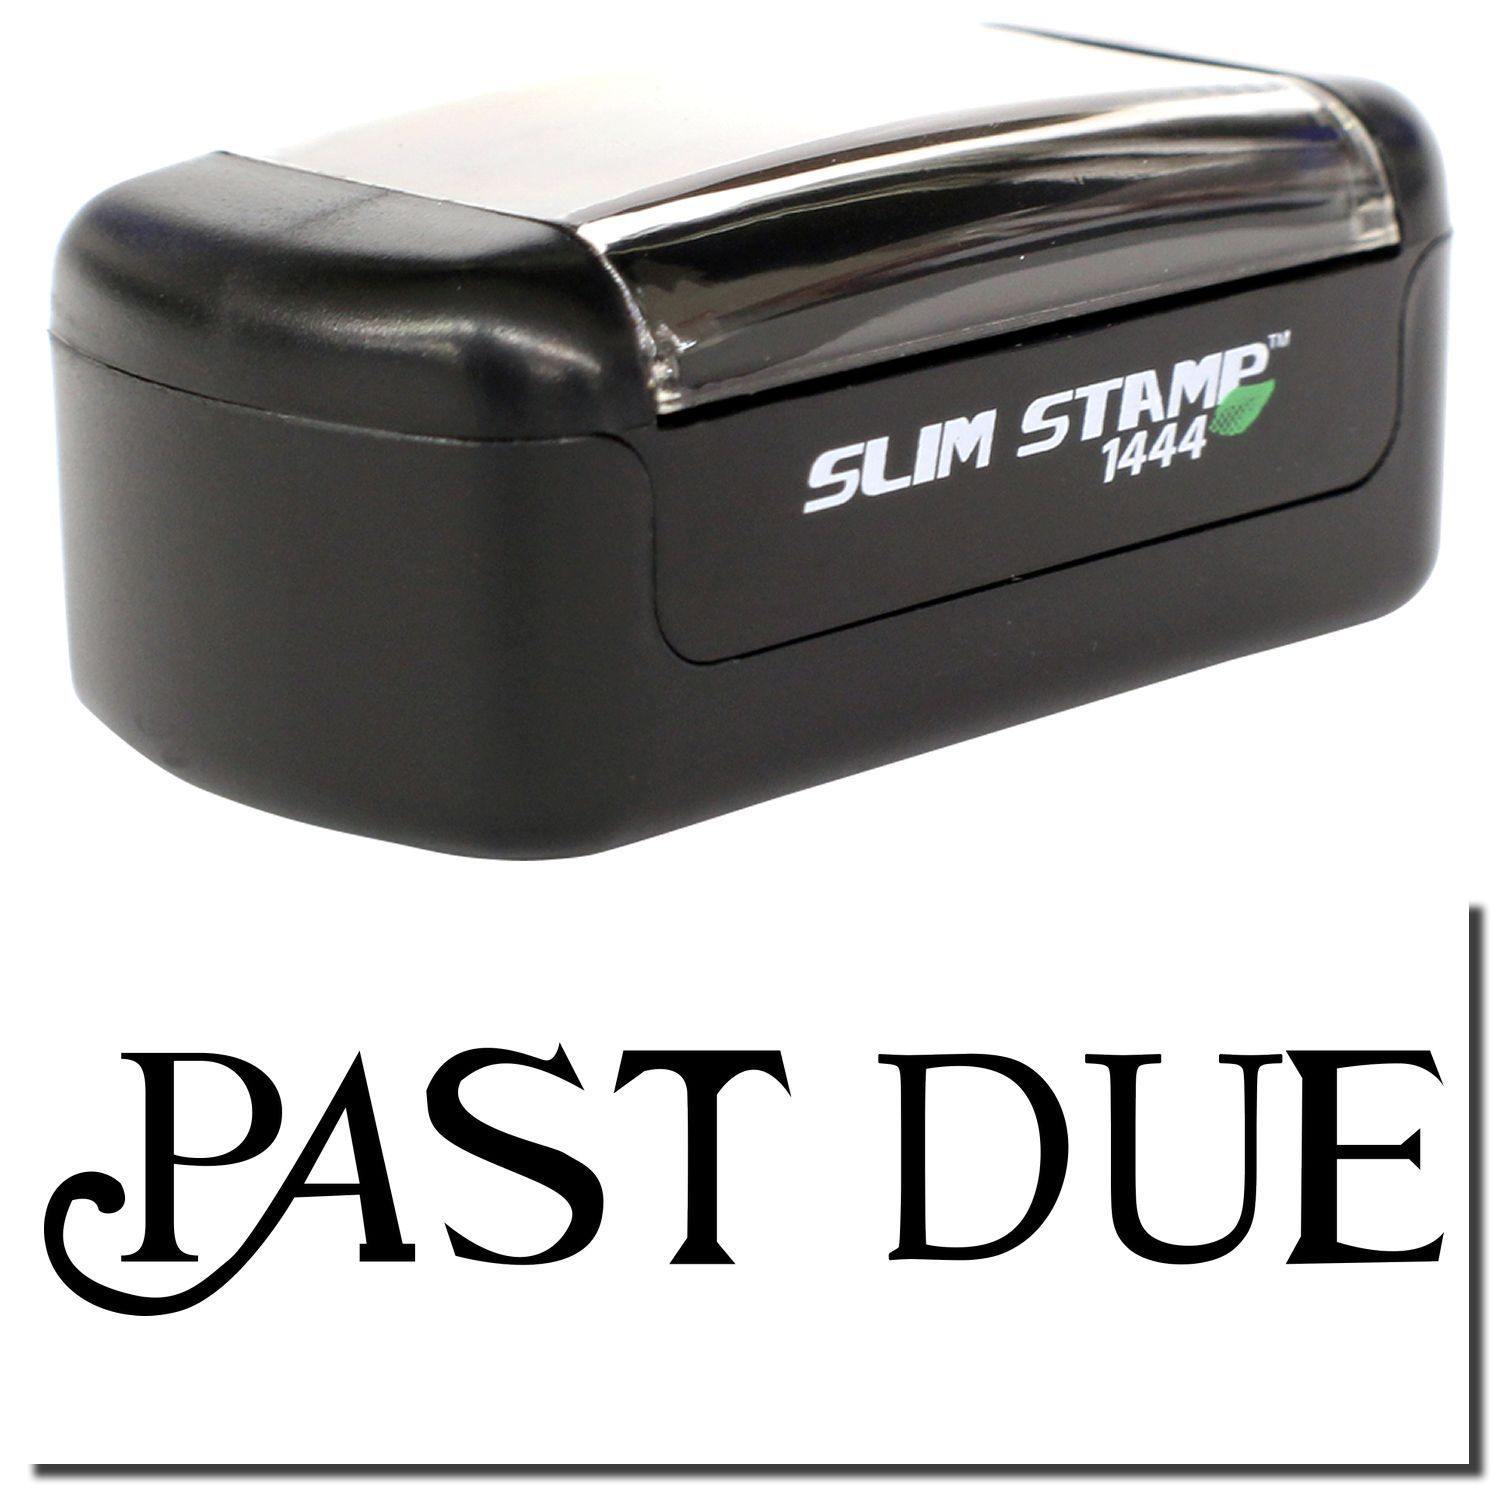 A stock office pre-inked stamp with a stamped image showing how the text "PAST DUE" in a curley font is displayed after stamping.